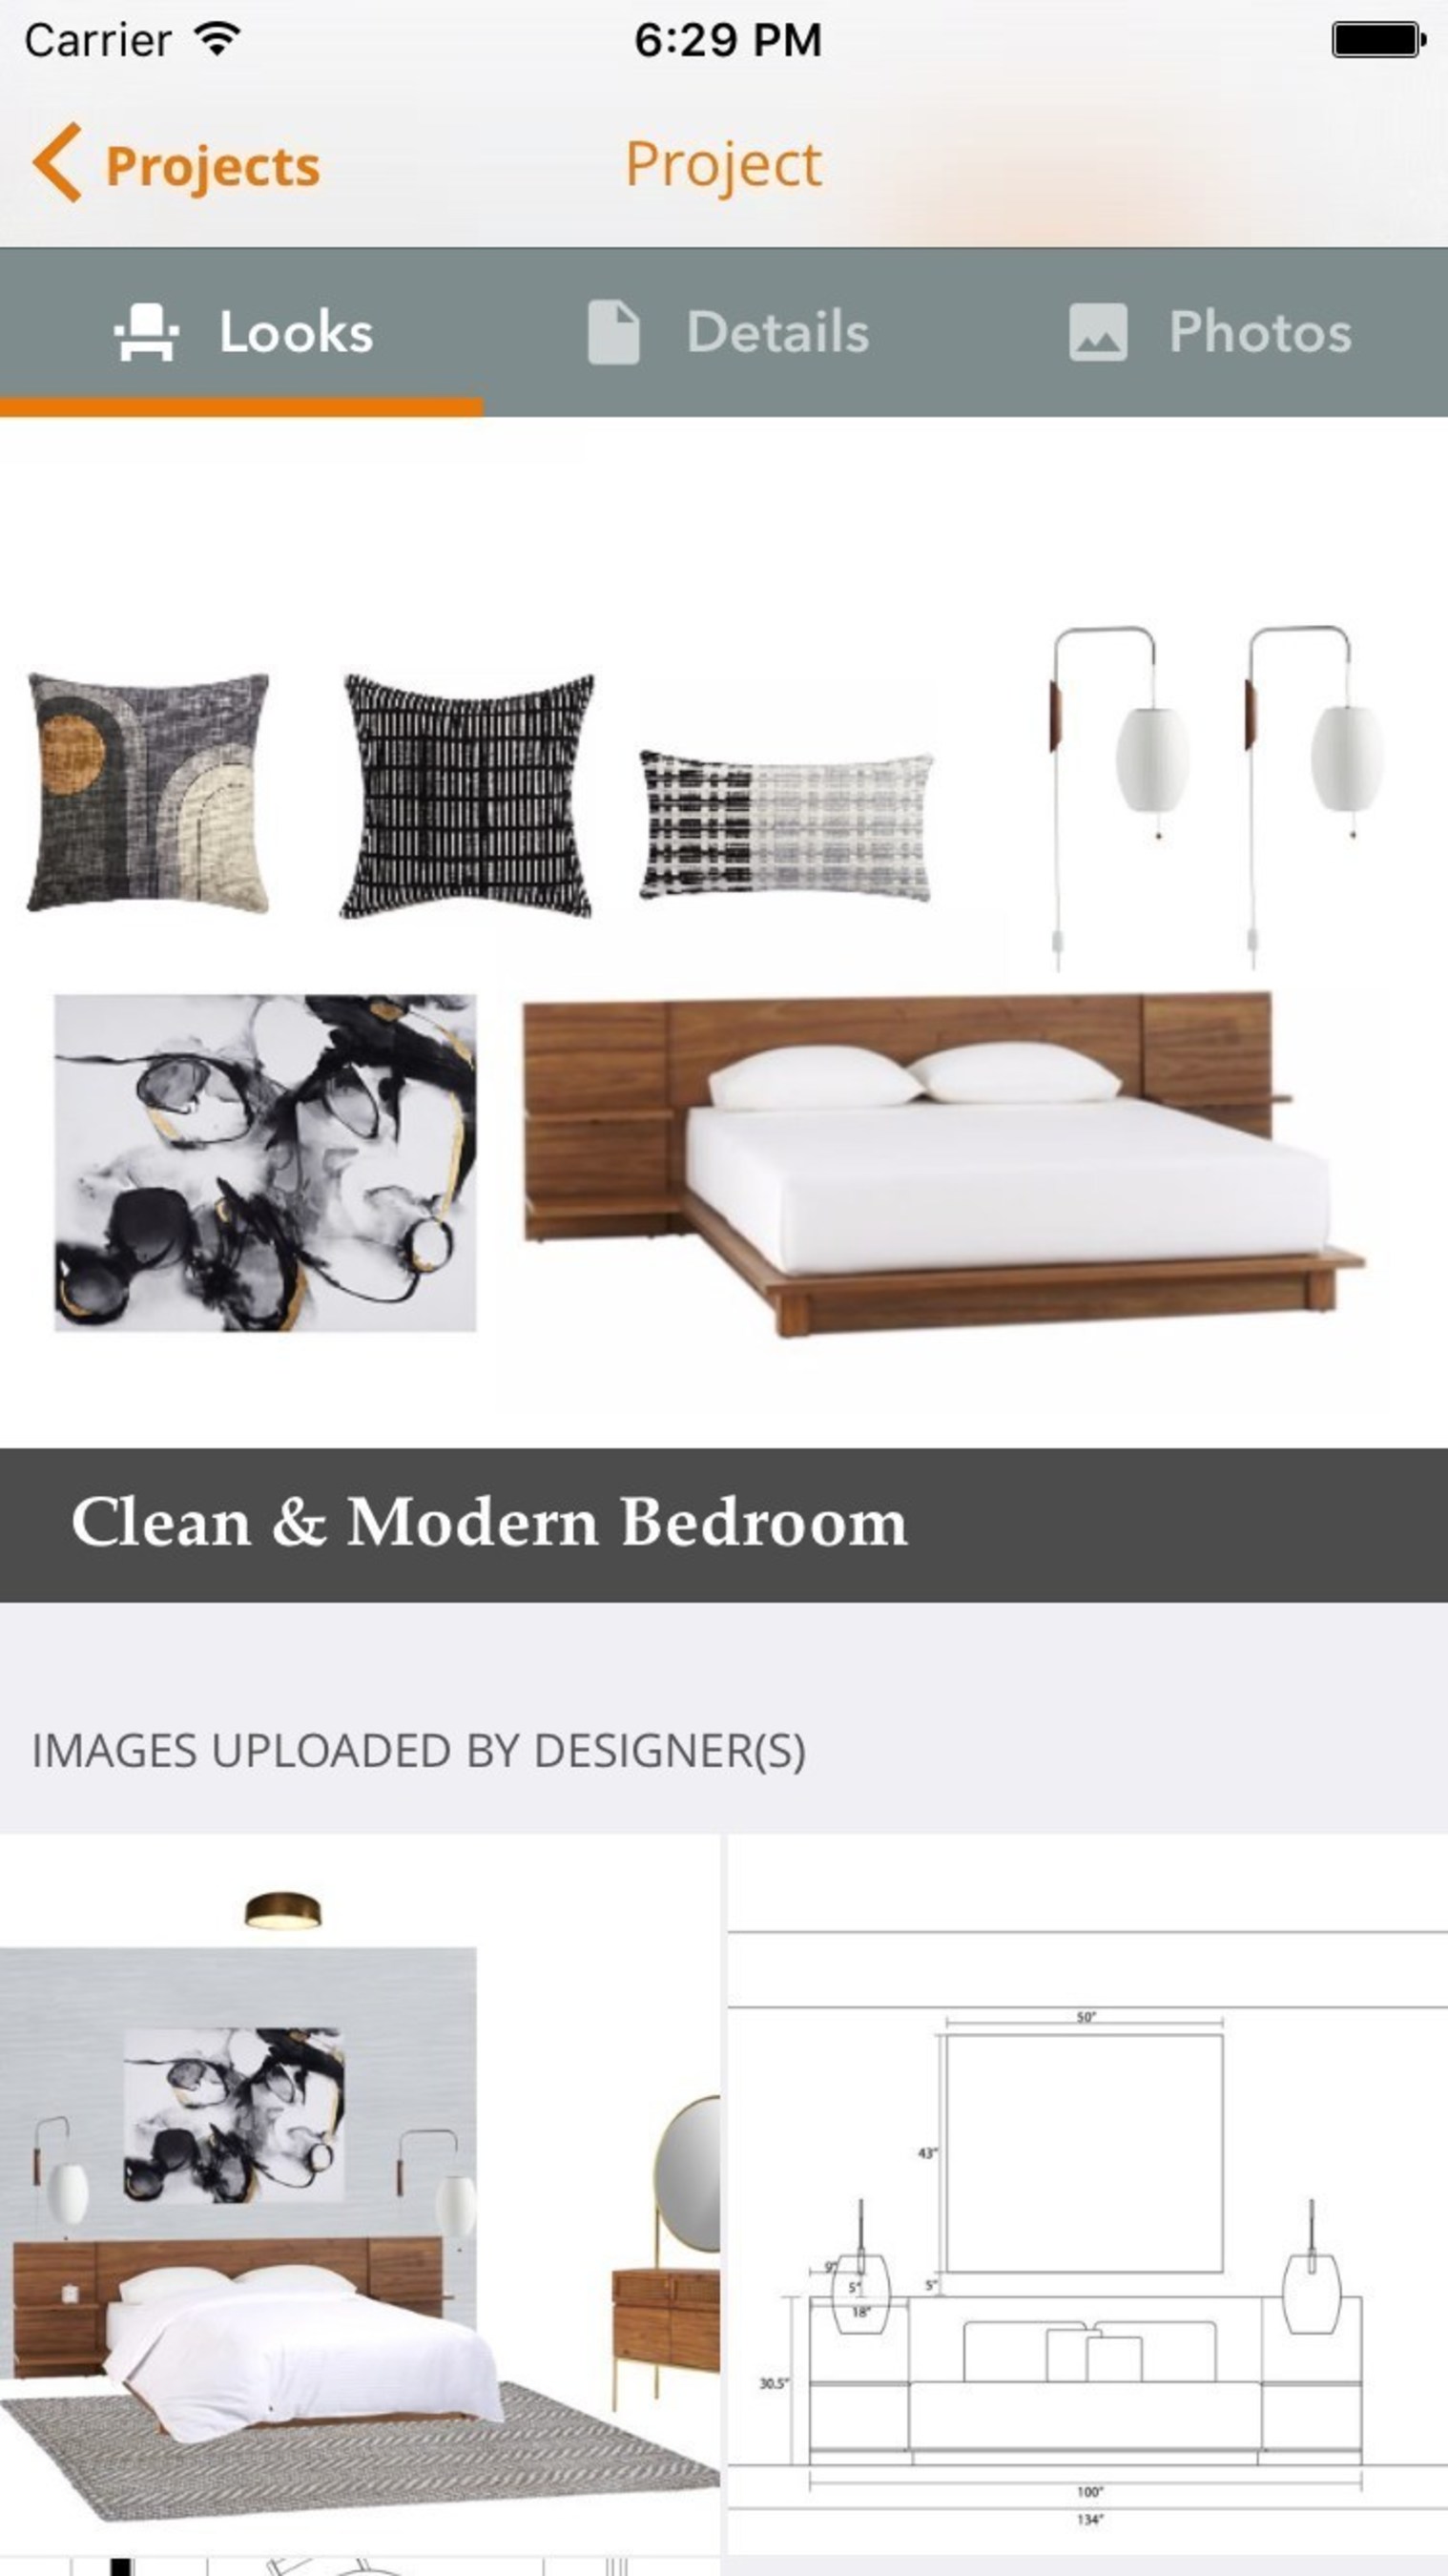 On the NousDecor app, a user can review completed looks, 3D renderings, design elevations and more all on the mobile device. In addition to uploading photos of rooms or inspiration via the app, this real-time communication with the design team makes the experience more streamlined and optimizes for beautiful design.